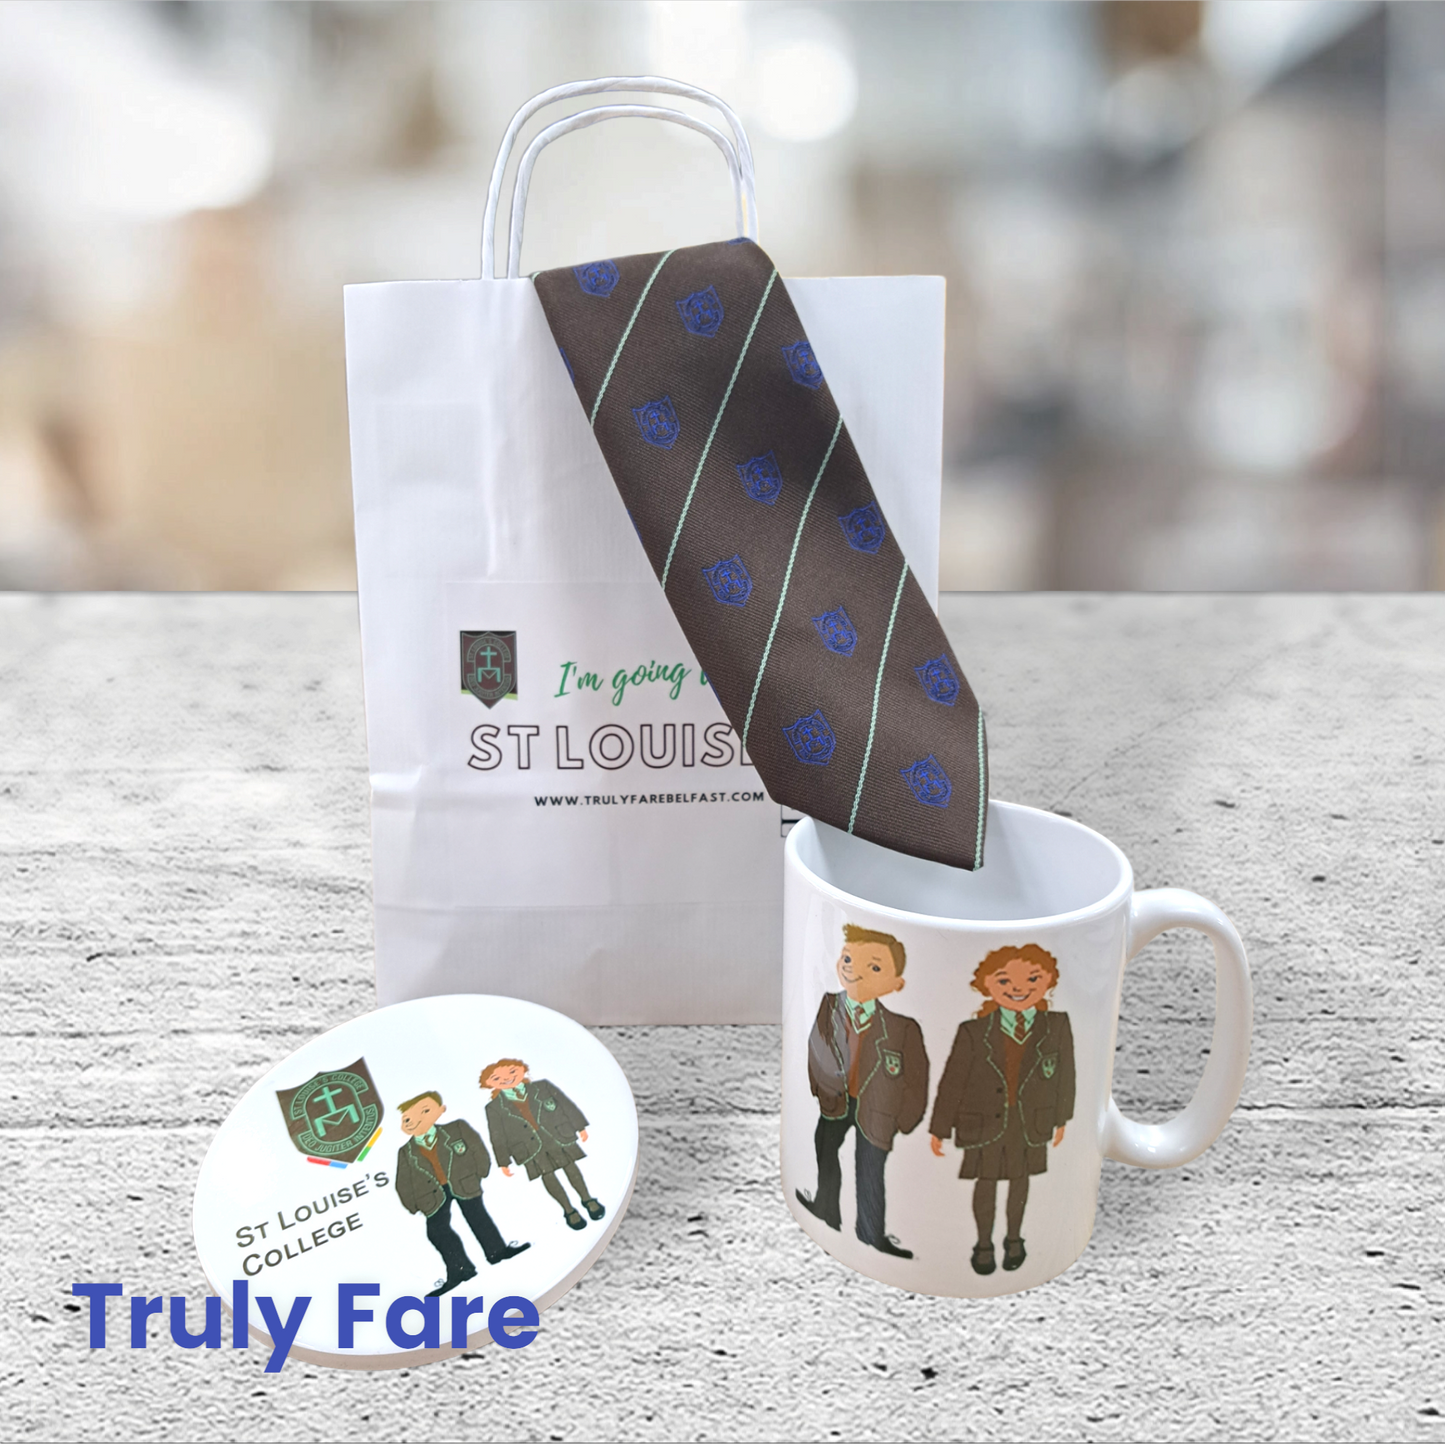 St Louise's coaster, tie, cup and gift bag set